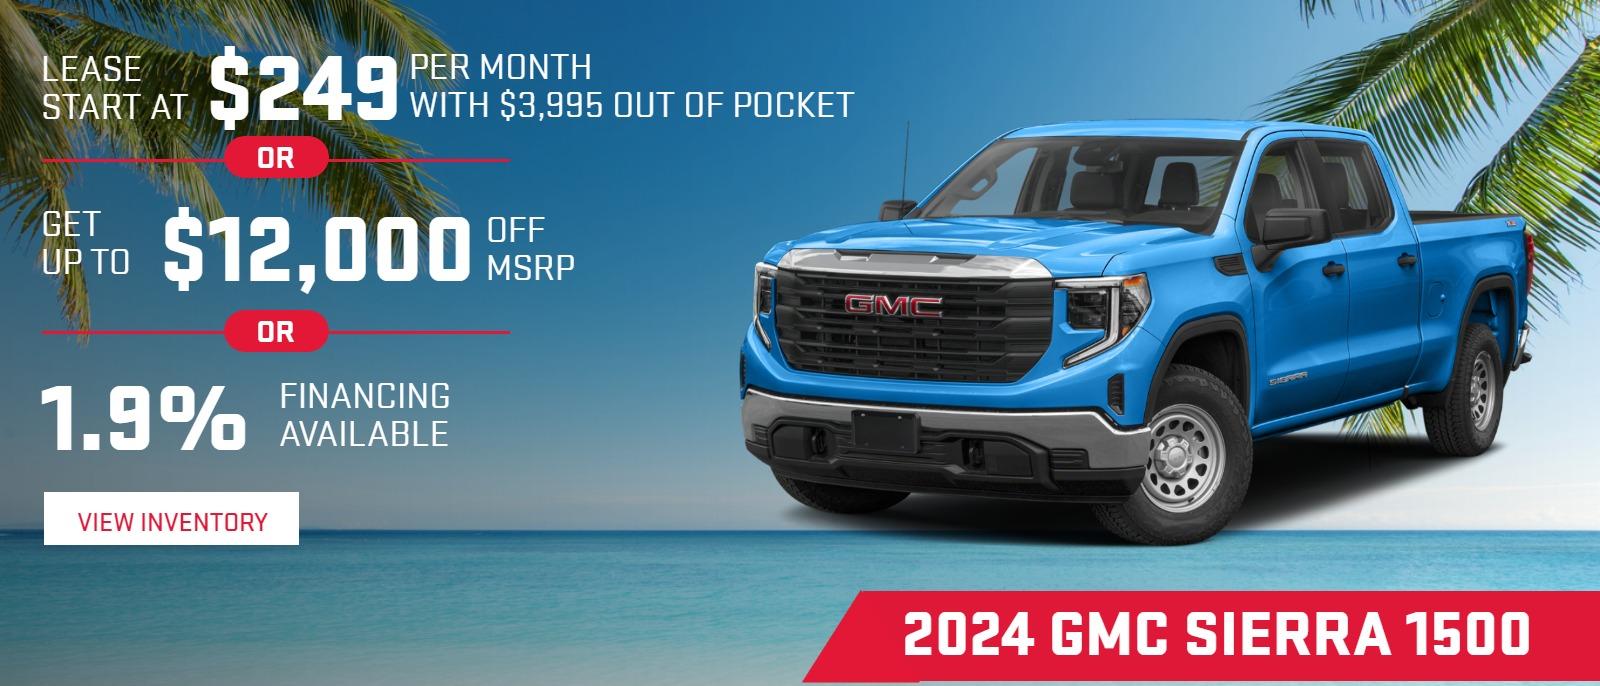 2024 GMC Sierra 1500
Leasses Start at $249 per month with $3995 out of pocket †††
Get up to $12000 off †
1.9% Financing Available††